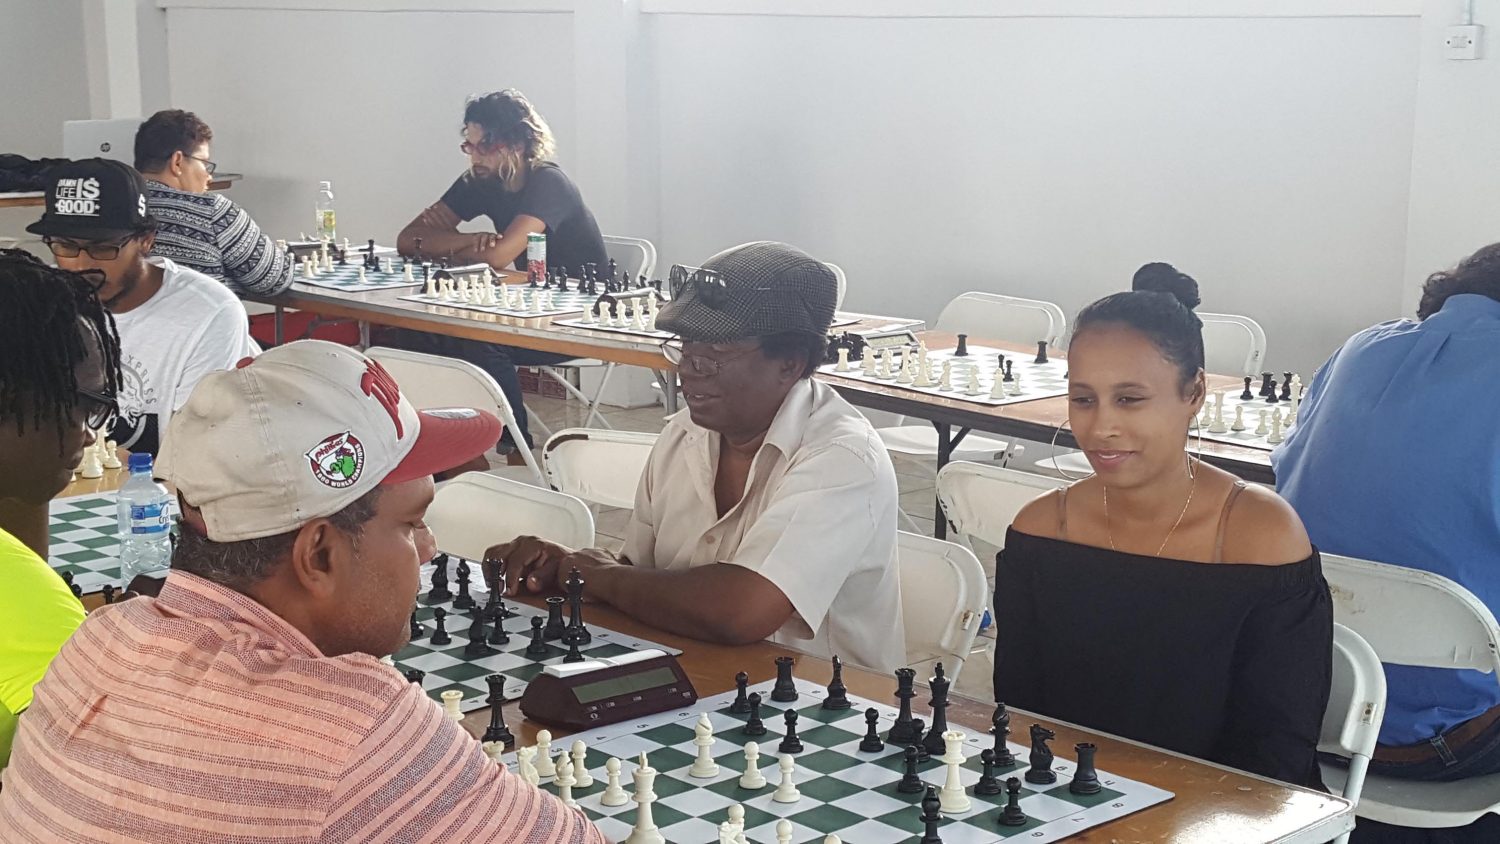 During the recent National Senior Qualifier Chess Tournament at the Aquatic Centre, Liliendaal, a number
of casual games were played as lunches were served. Stephanie Chung (right), a student of chess and onlooker at the qualifier, faces Rose Hall’s Kriskal Persaud during a fun game. Next to Chung is former national chess player David Khan. Rashad Hussain is in concentration against Maria Varona-Thomas in the background. 